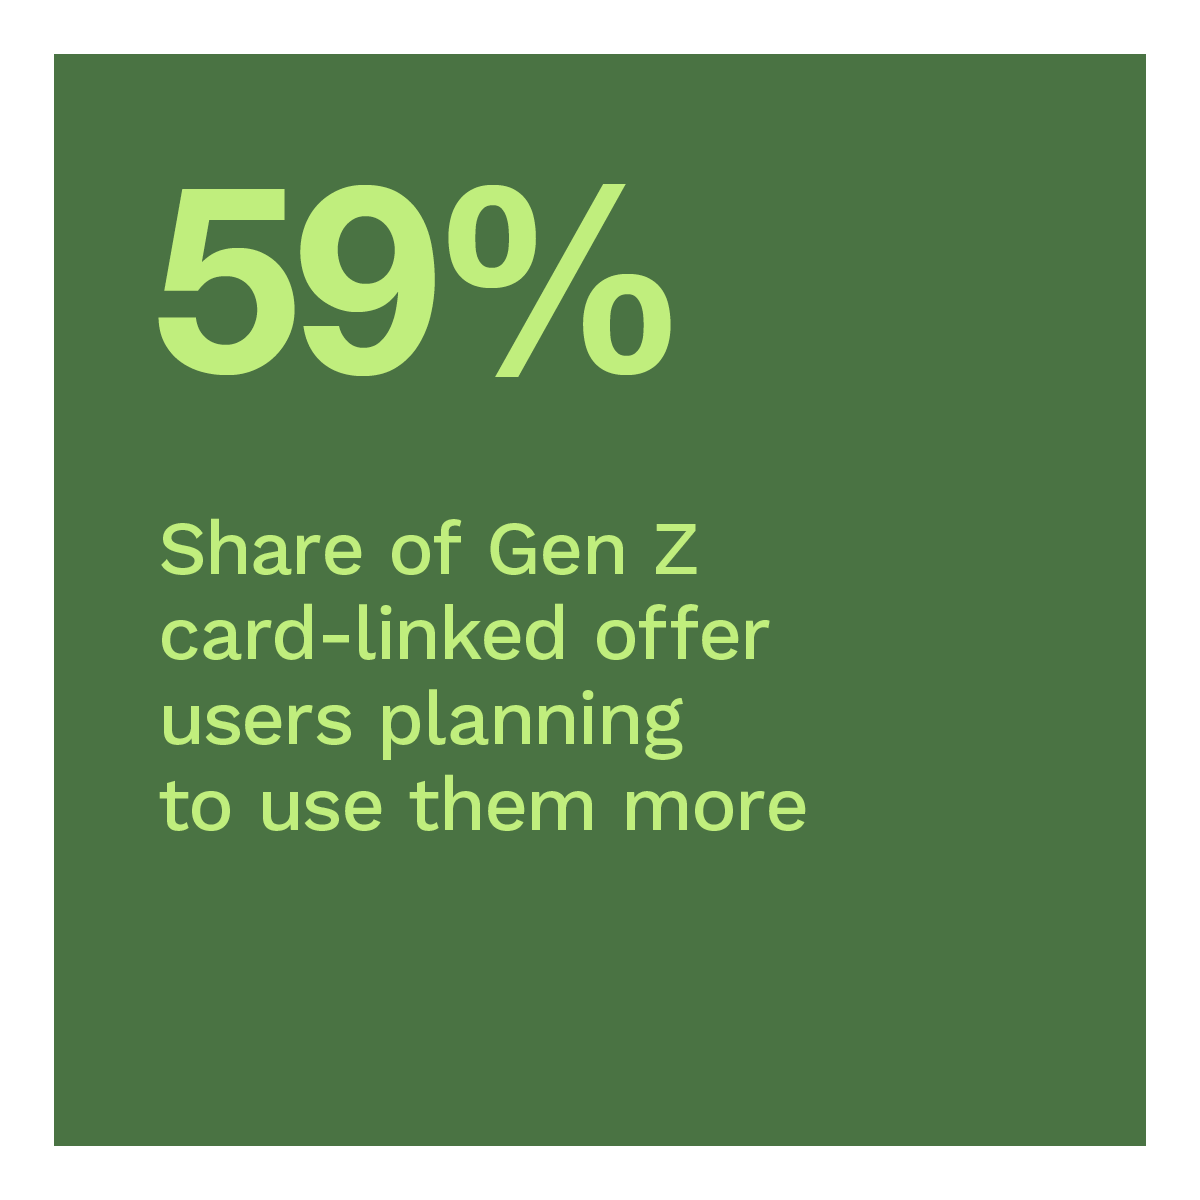  Share of Gen Z card-linked offer users planning to use them more